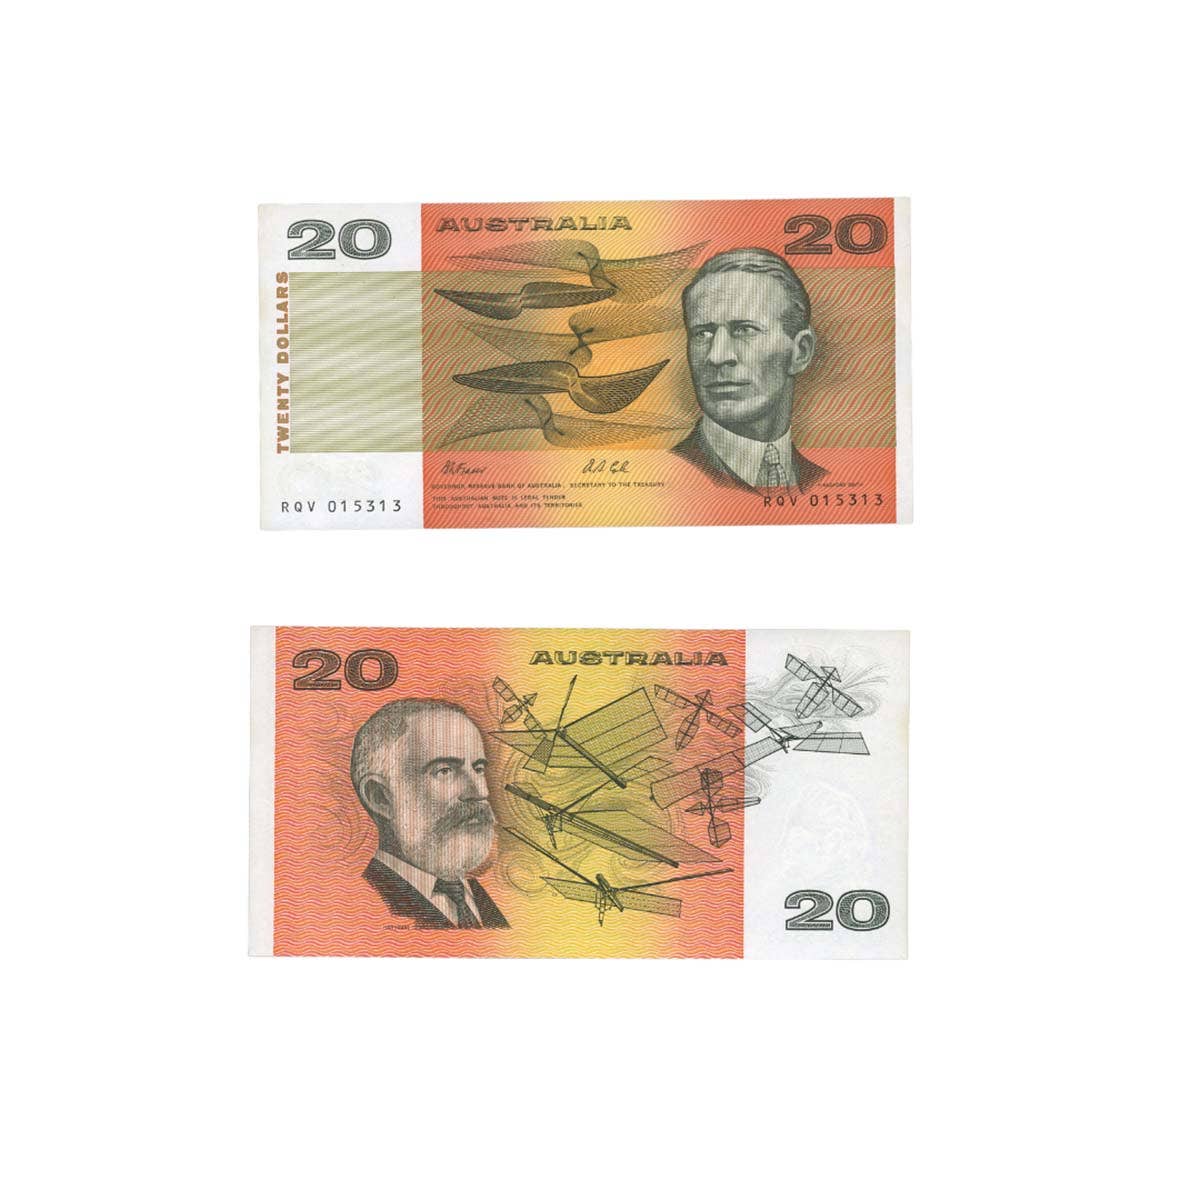 1991 $20 R413 Fraser/Cole Banknote Uncirculated